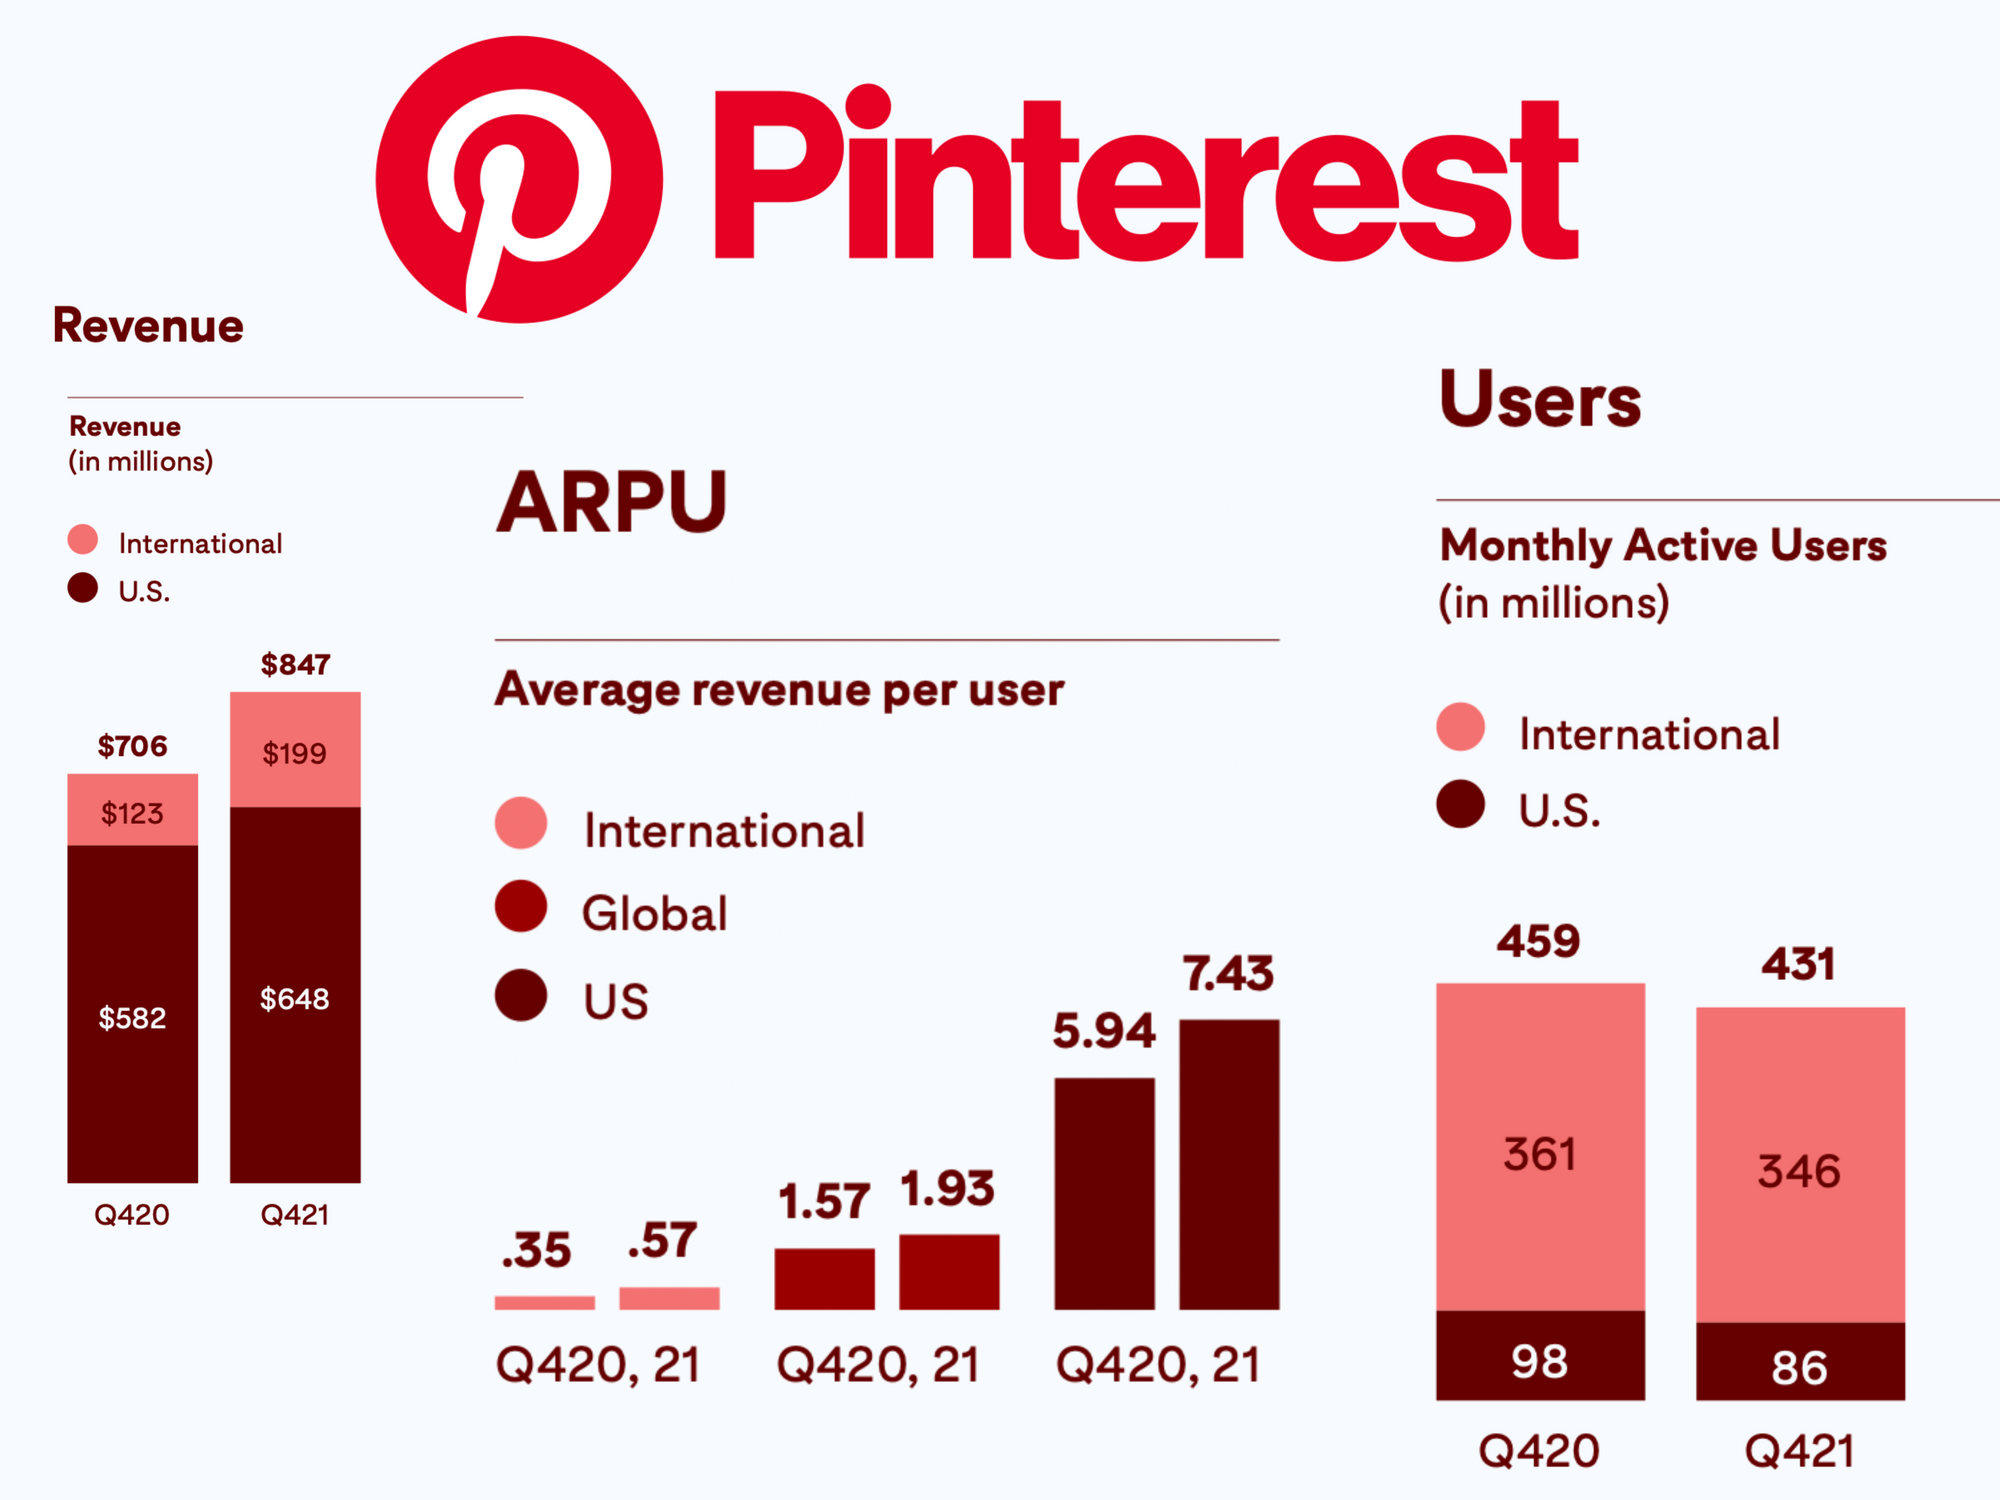 Pinterest revenue grows 20% in Q4, but active users are decreasing